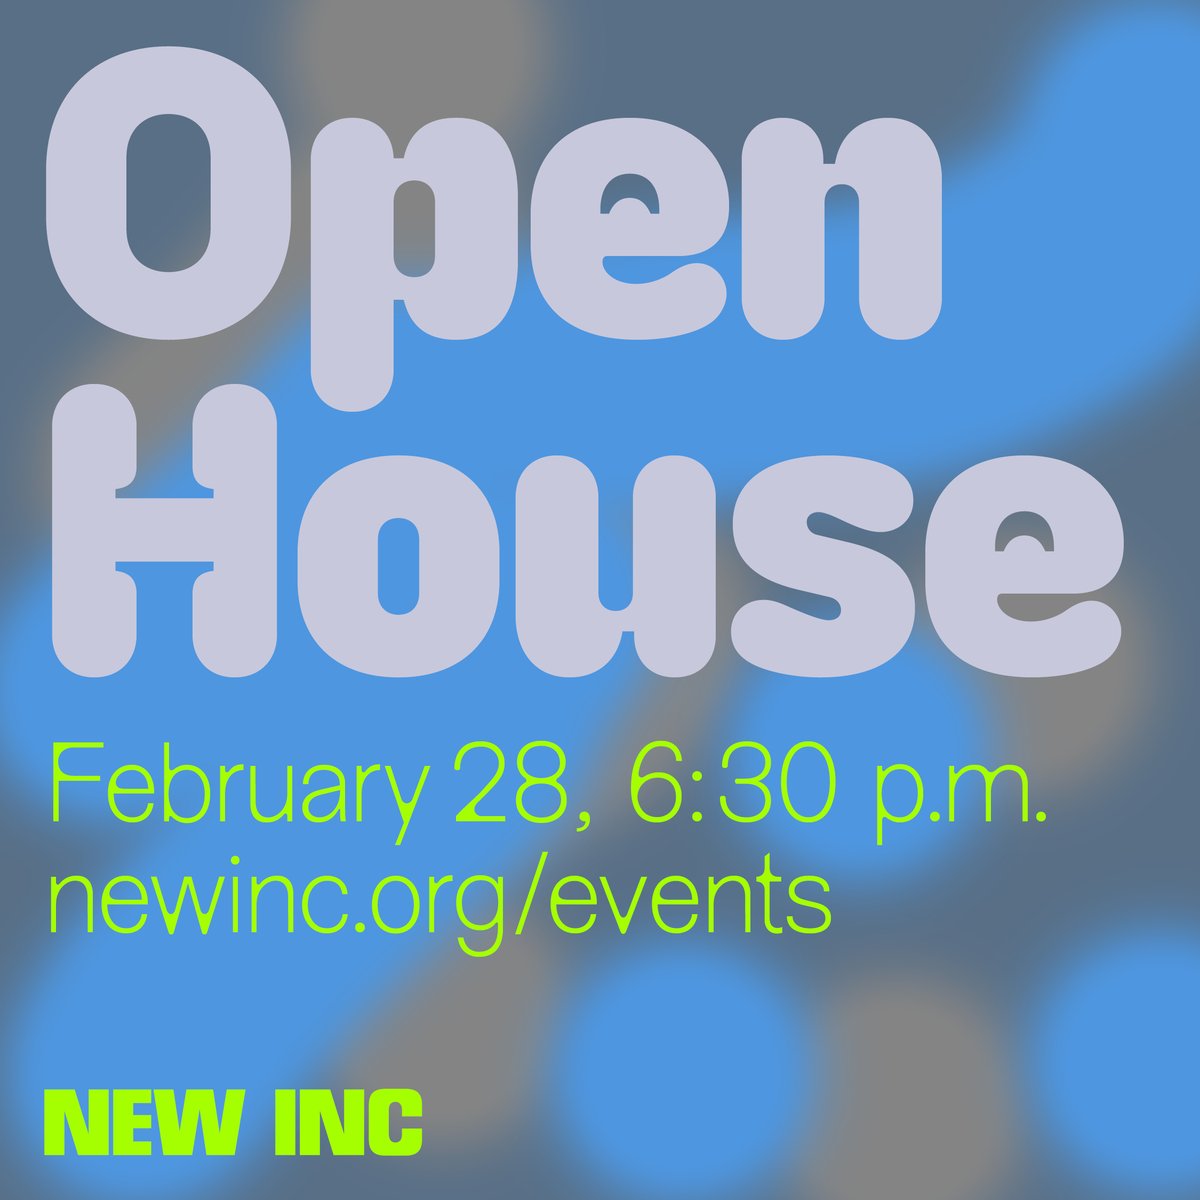 PROSPECTIVE APPLICANTS for our Y11 Cohort — Join us *virtually* for Open House on February 28th at 6:30PM! Get to know the NEW INC team a bit, meet some of our current members, and learn more about what it's like to participate in our program: bit.ly/3SErnAc